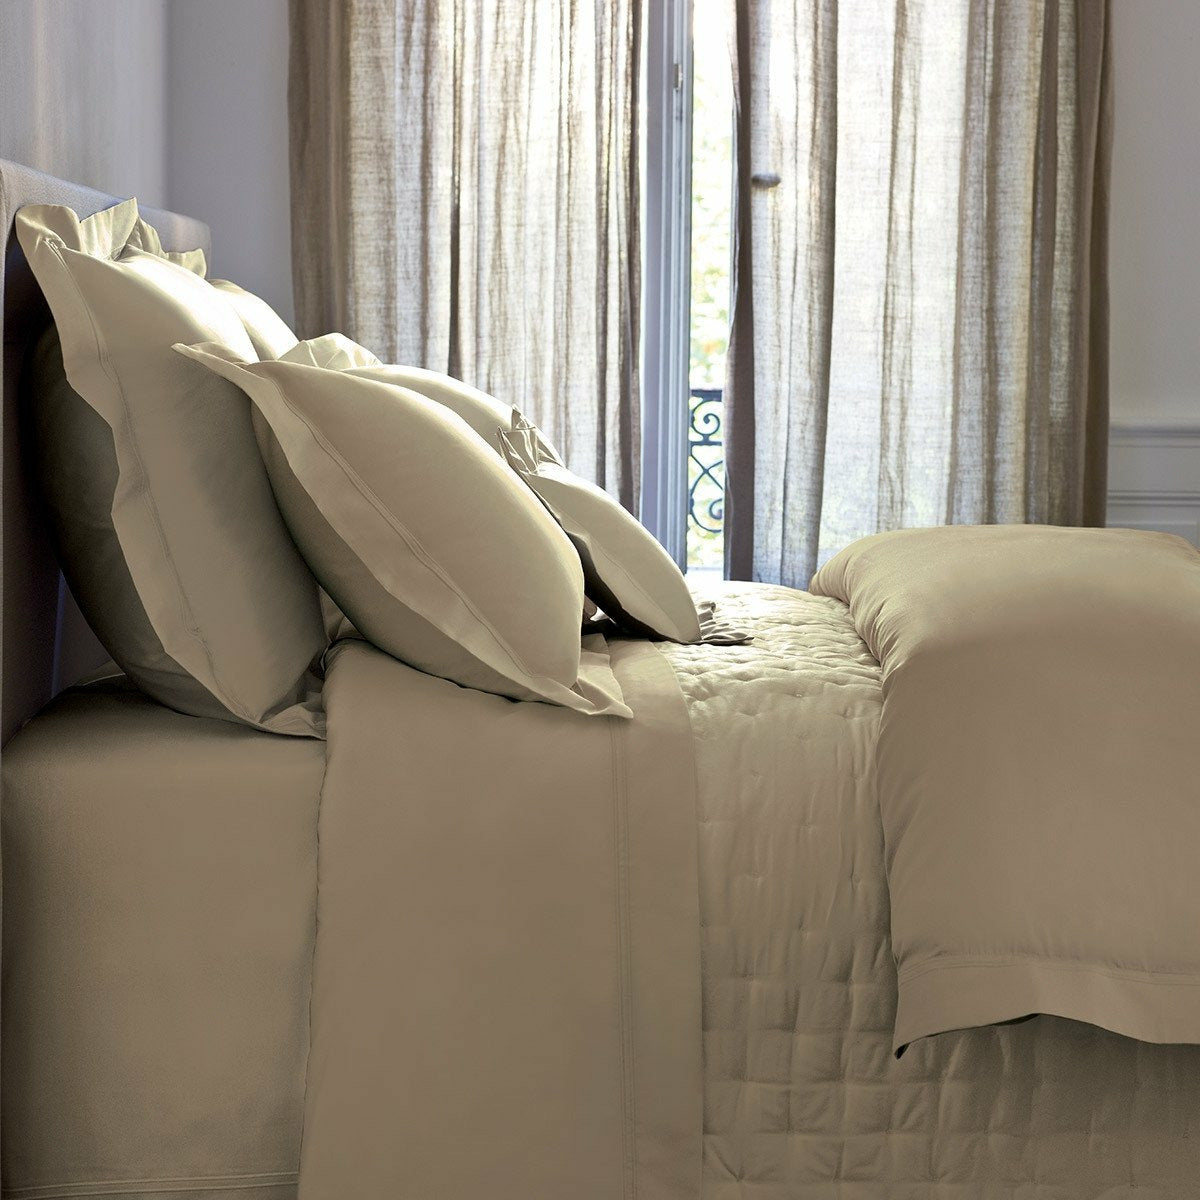 Yves Delorme Triomphe Bedding Lifestyle Pierre Fine Linens